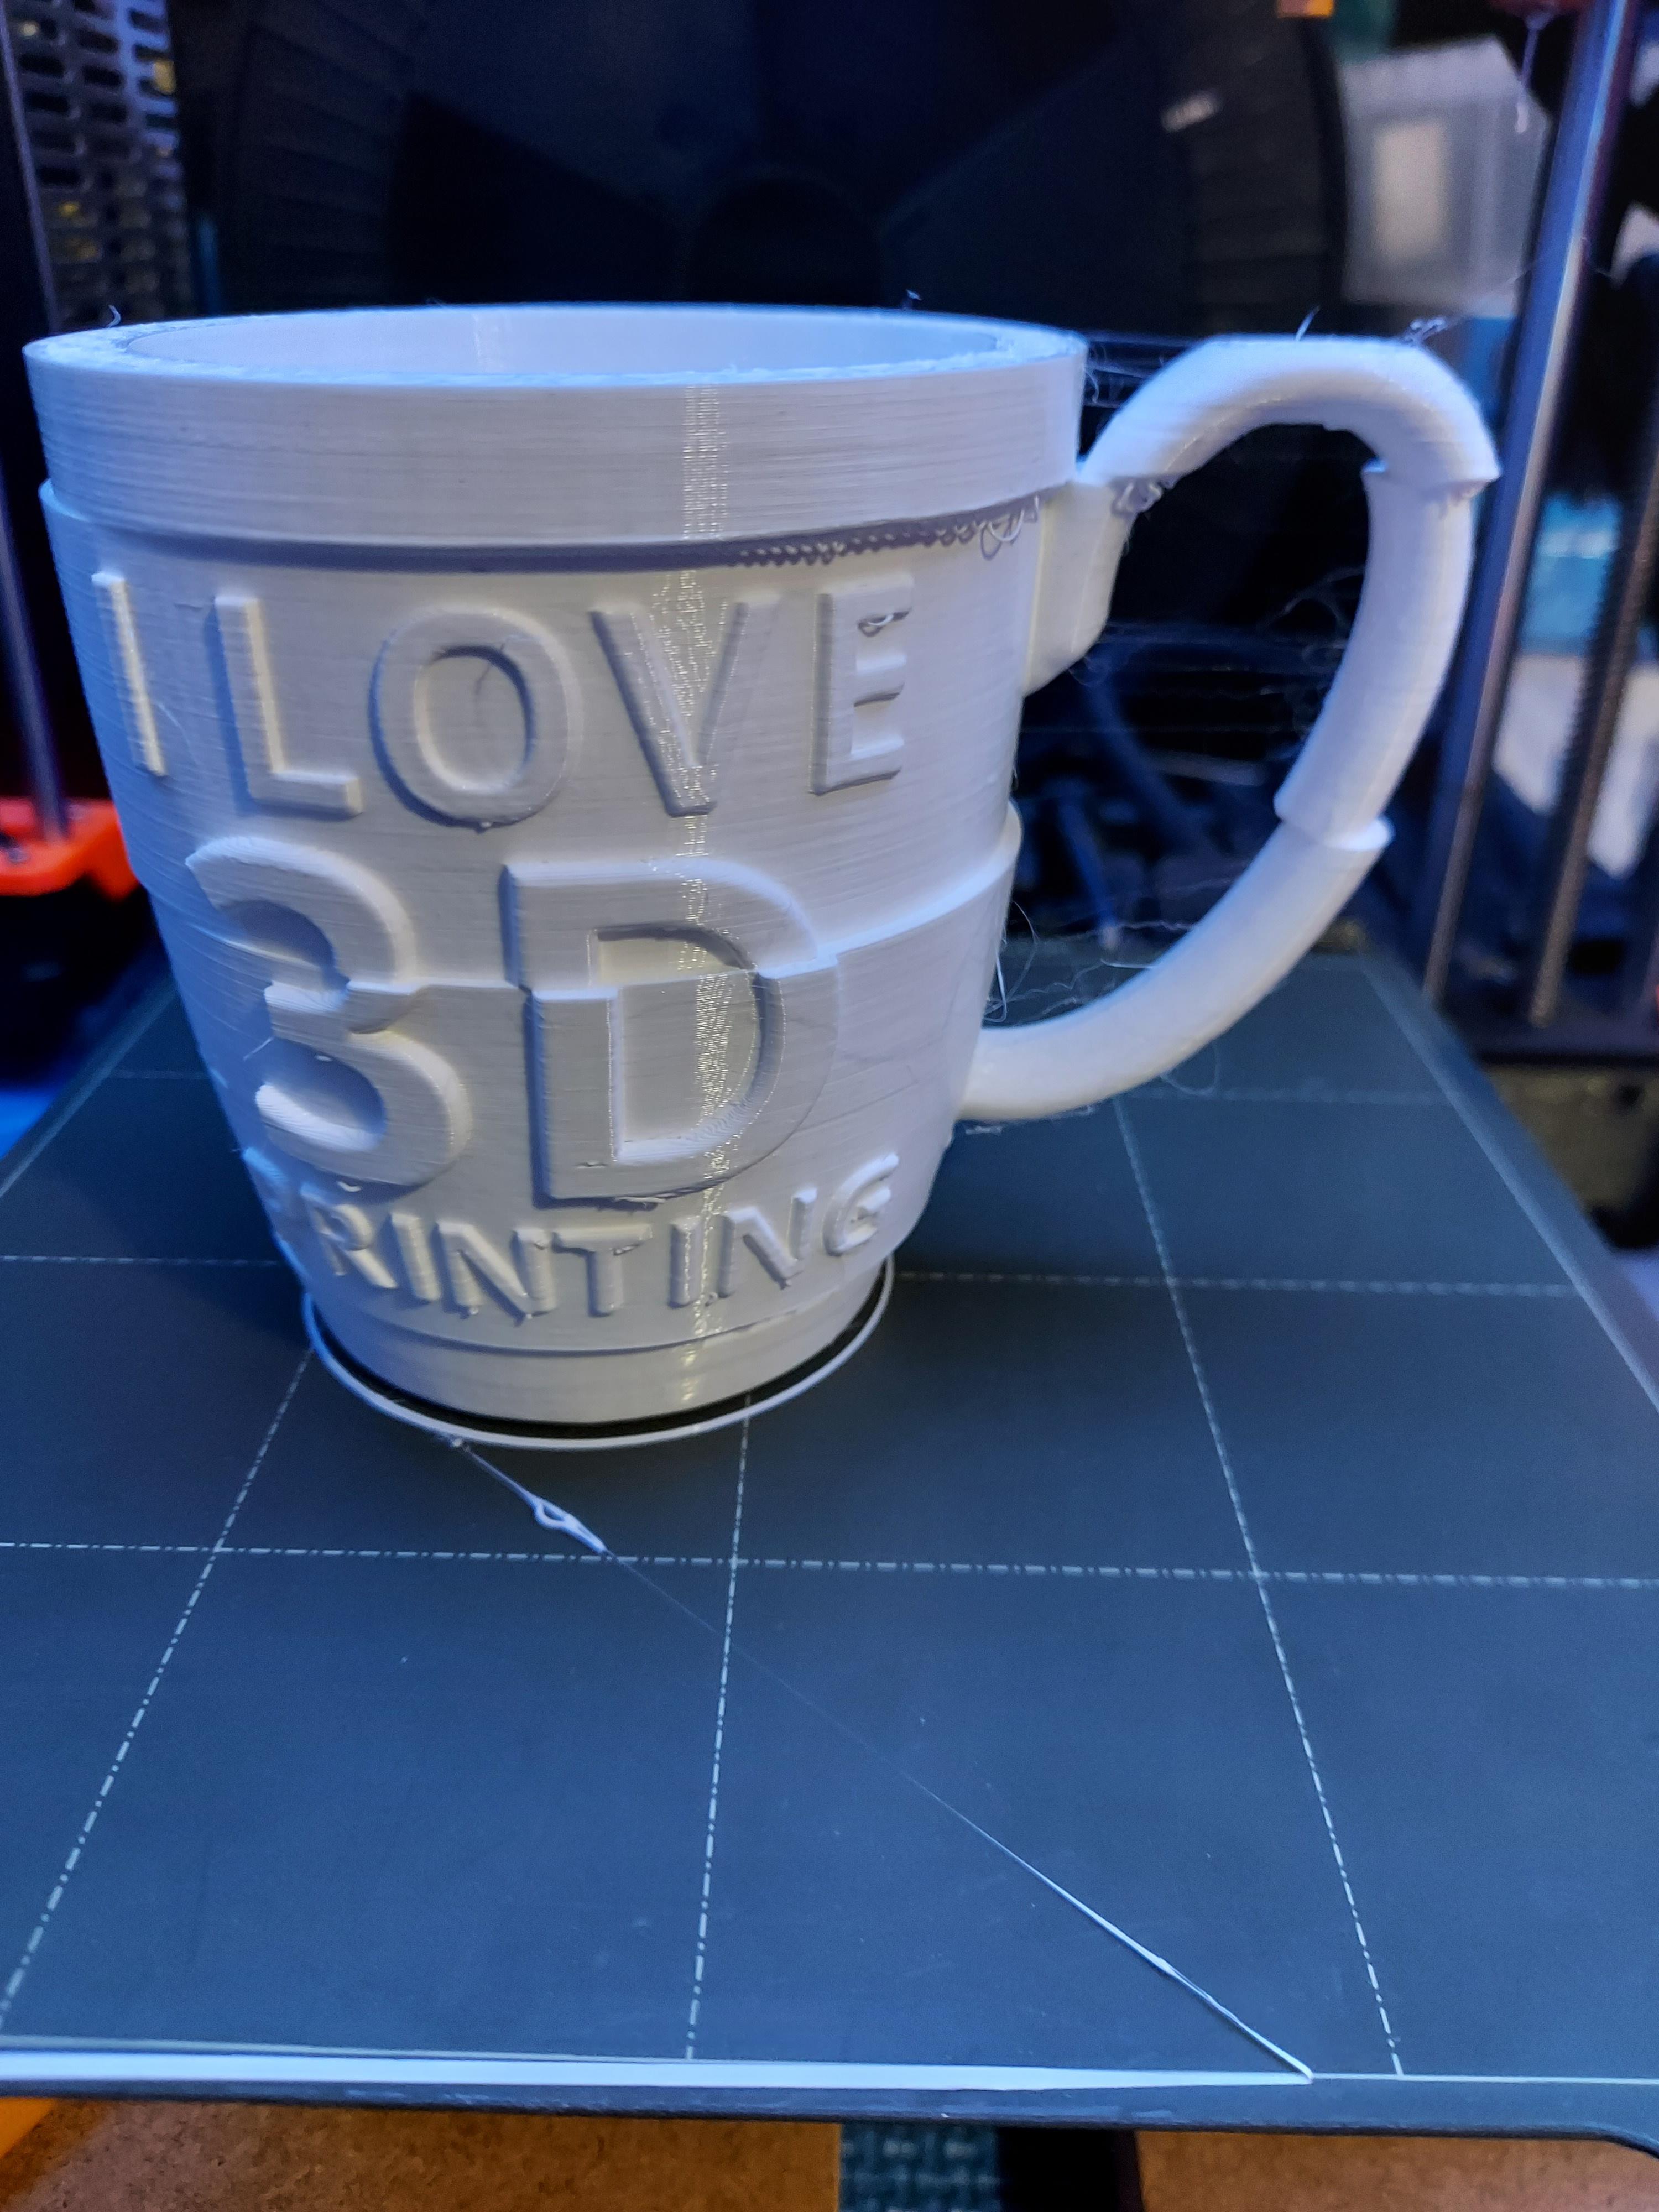 I Love 3D Printing Gag Gift Mug - My printer/filament decided it needed some stringing for extra authenticity as well. 

I have a near 100% failure record with white filament (just white!), ironically the mug finished without any other issue than the stringing (filament's been open for a year or two). - 3d model